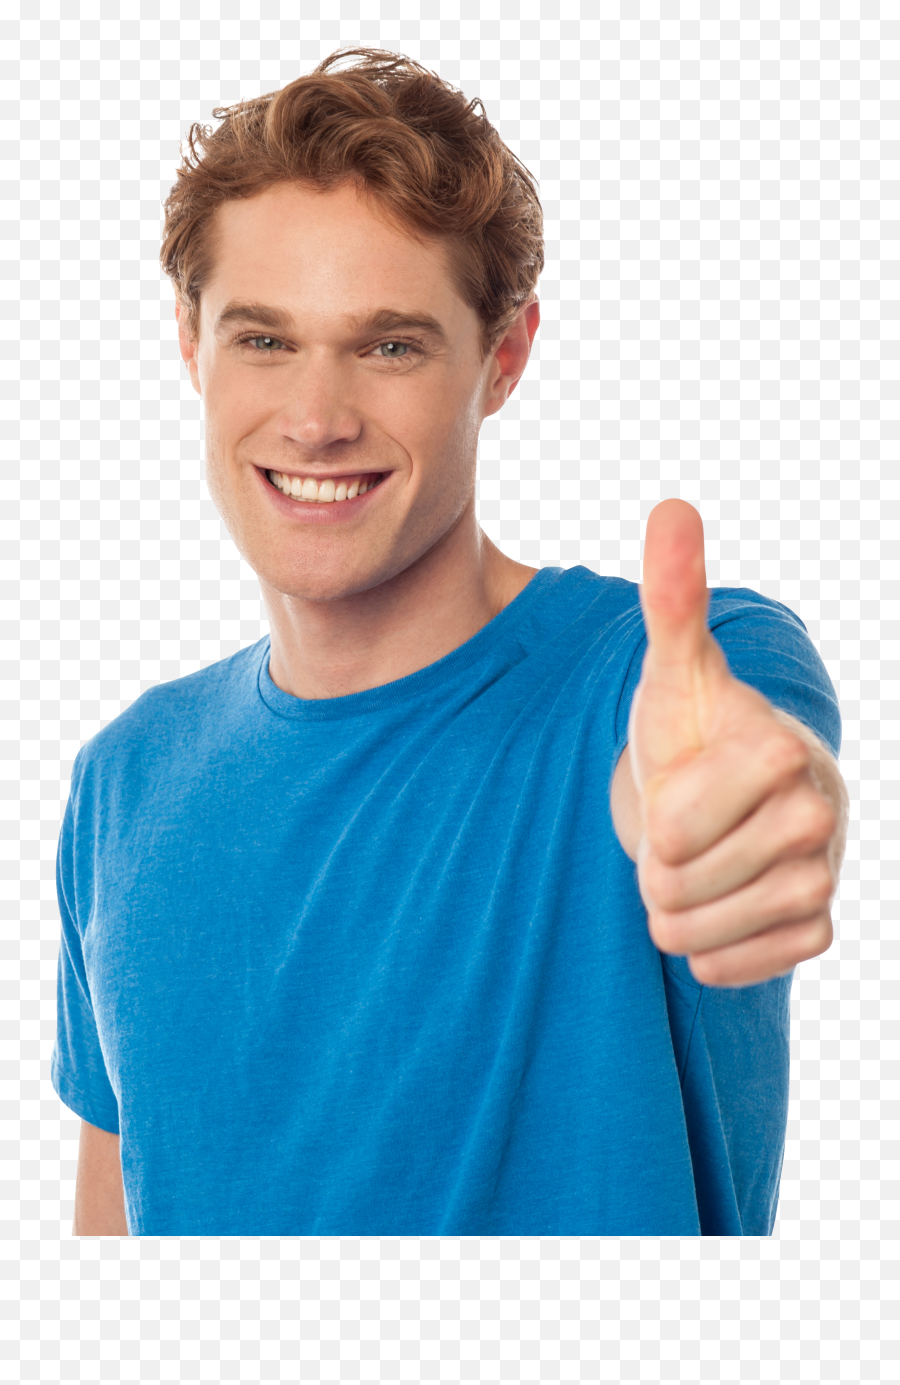 Men Pointing Thumbs Up Png Image Emoji,Thumbs Up Png